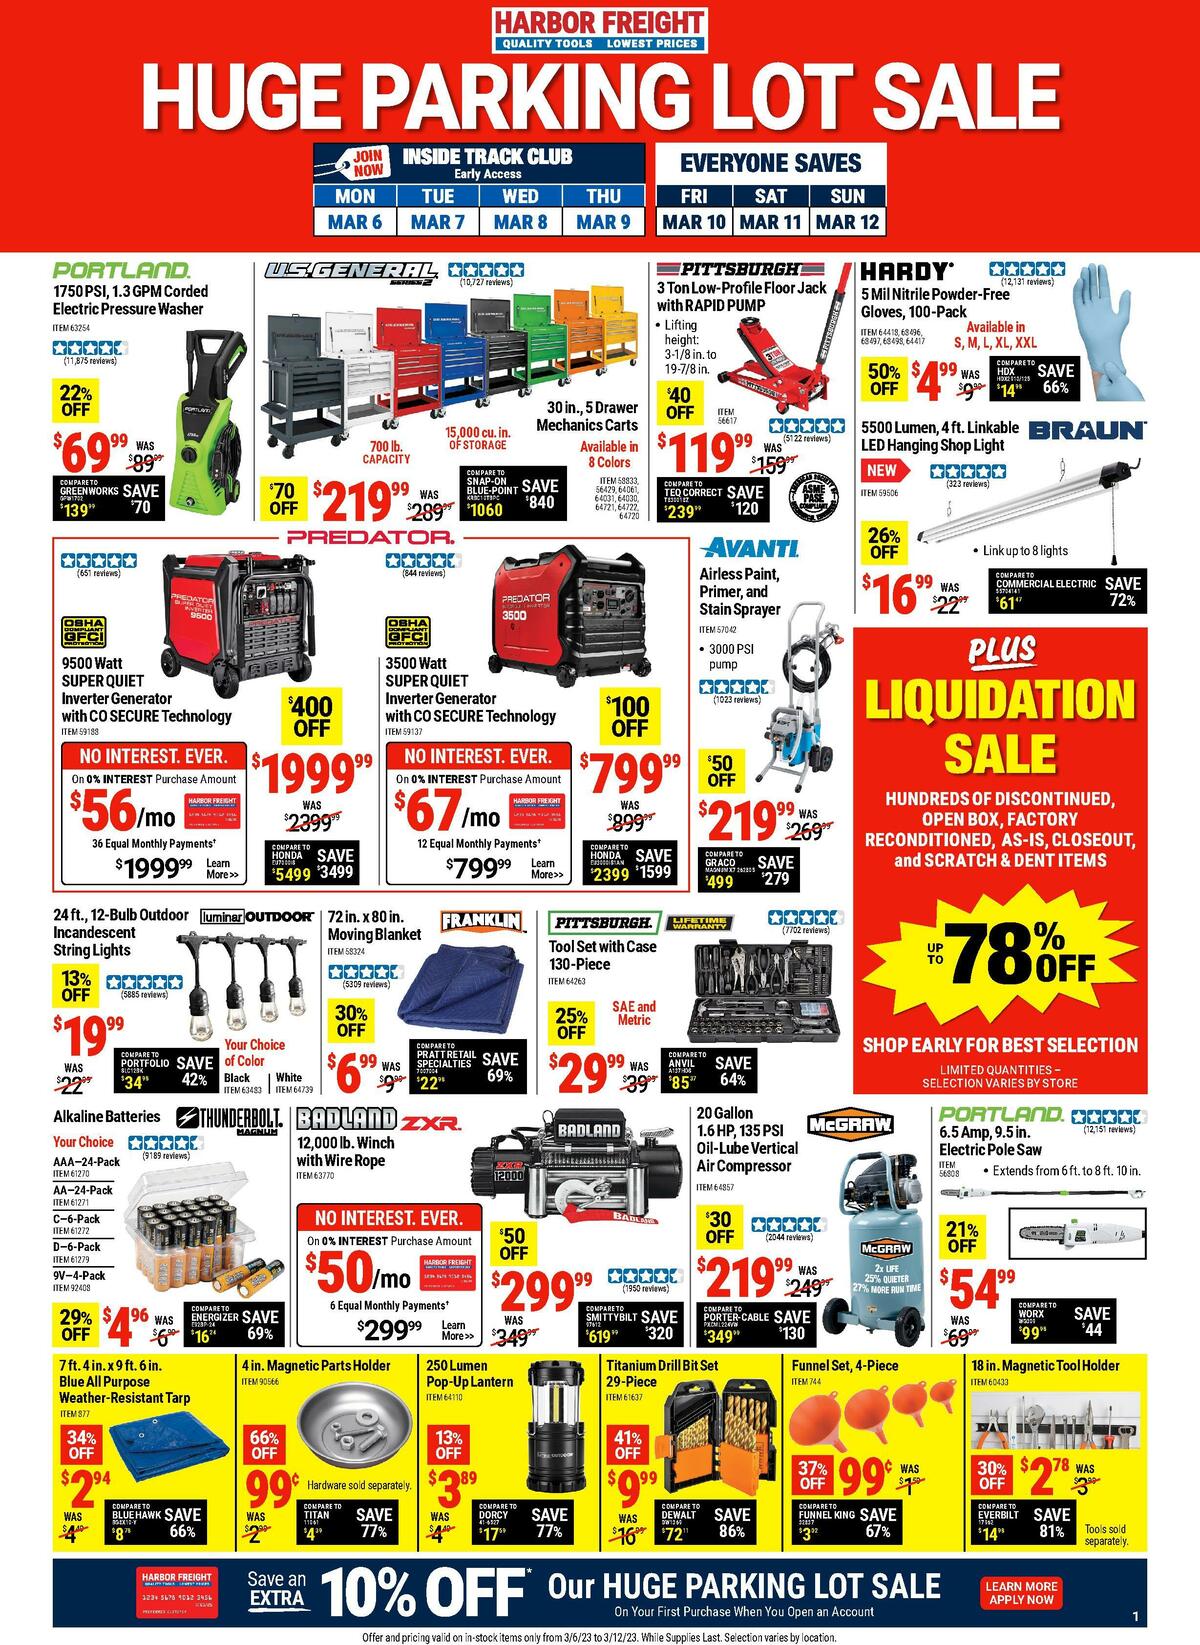 Harbor Freight Tools Best Offers & Special Buys from March 6